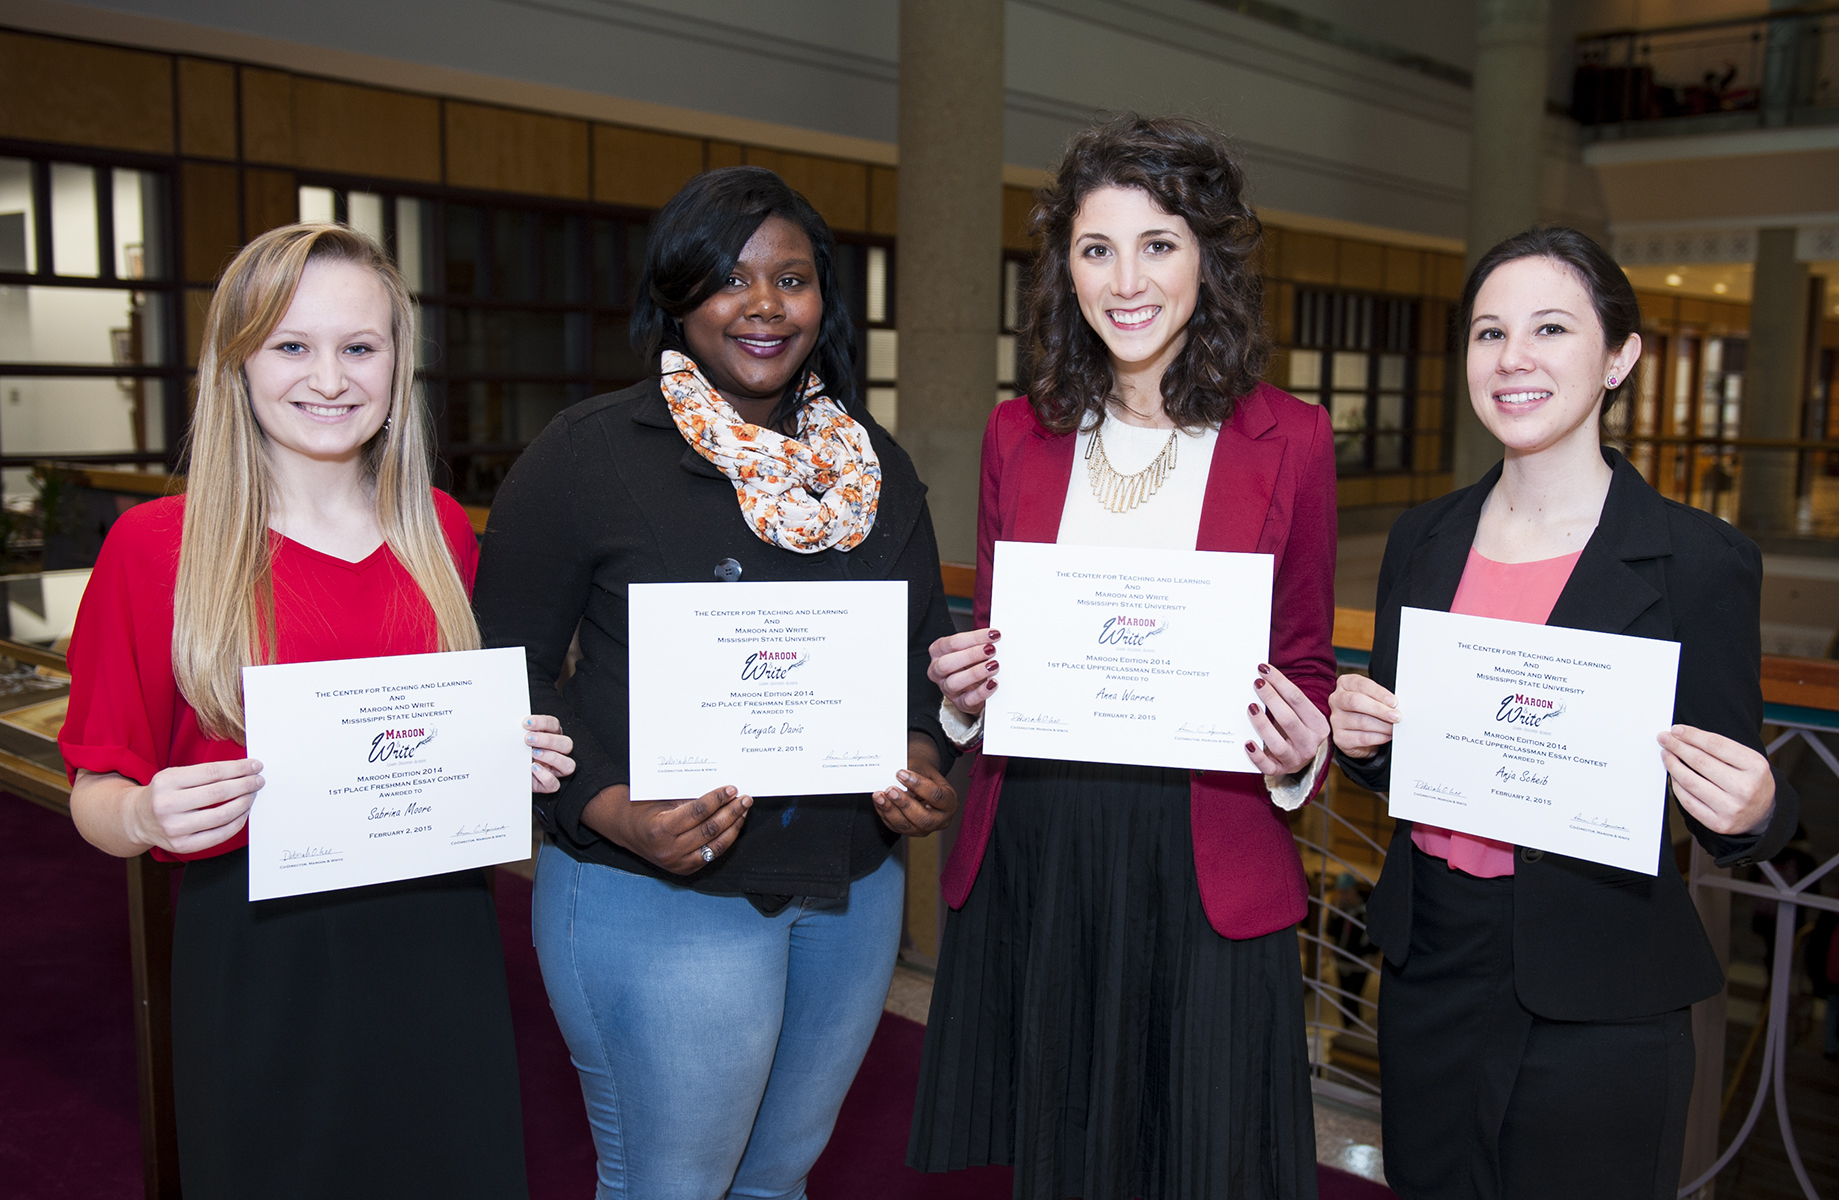 MSU's 2014-15 Maroon Edition Essay Contest winners include (l-r) Sabrina E. Moore of Starkville, Kenyata S. Davis of Kosciusko, Anna M. Warren of Collierville, Tennessee, and Anja C. Scheib of Canton. Not pictured are Kelsey E. Green, also of Starkville, and Tayler Watson of Clinton.